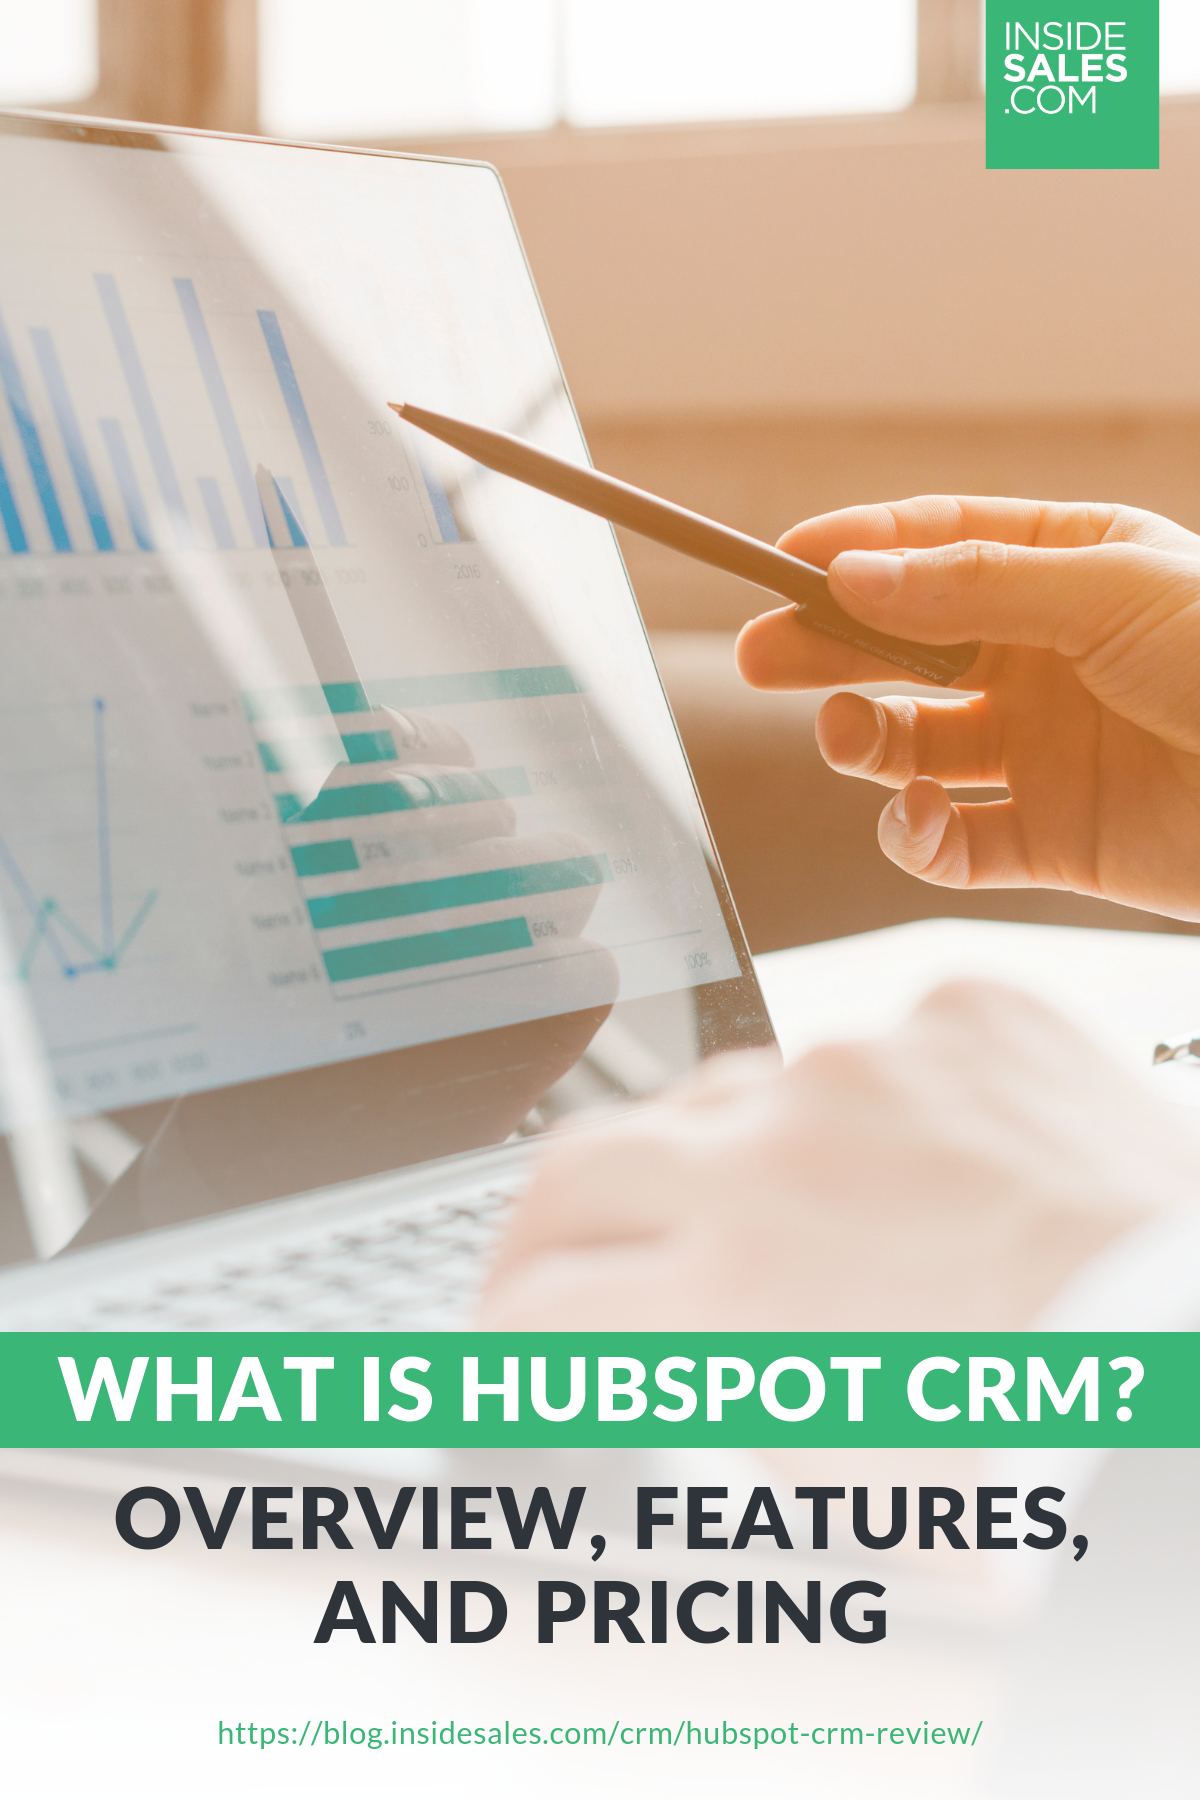 What Is Hubspot CRM Overview, Features, And Pricing https://www.insidesales.com/blog/crm/hubspot-crm-review/